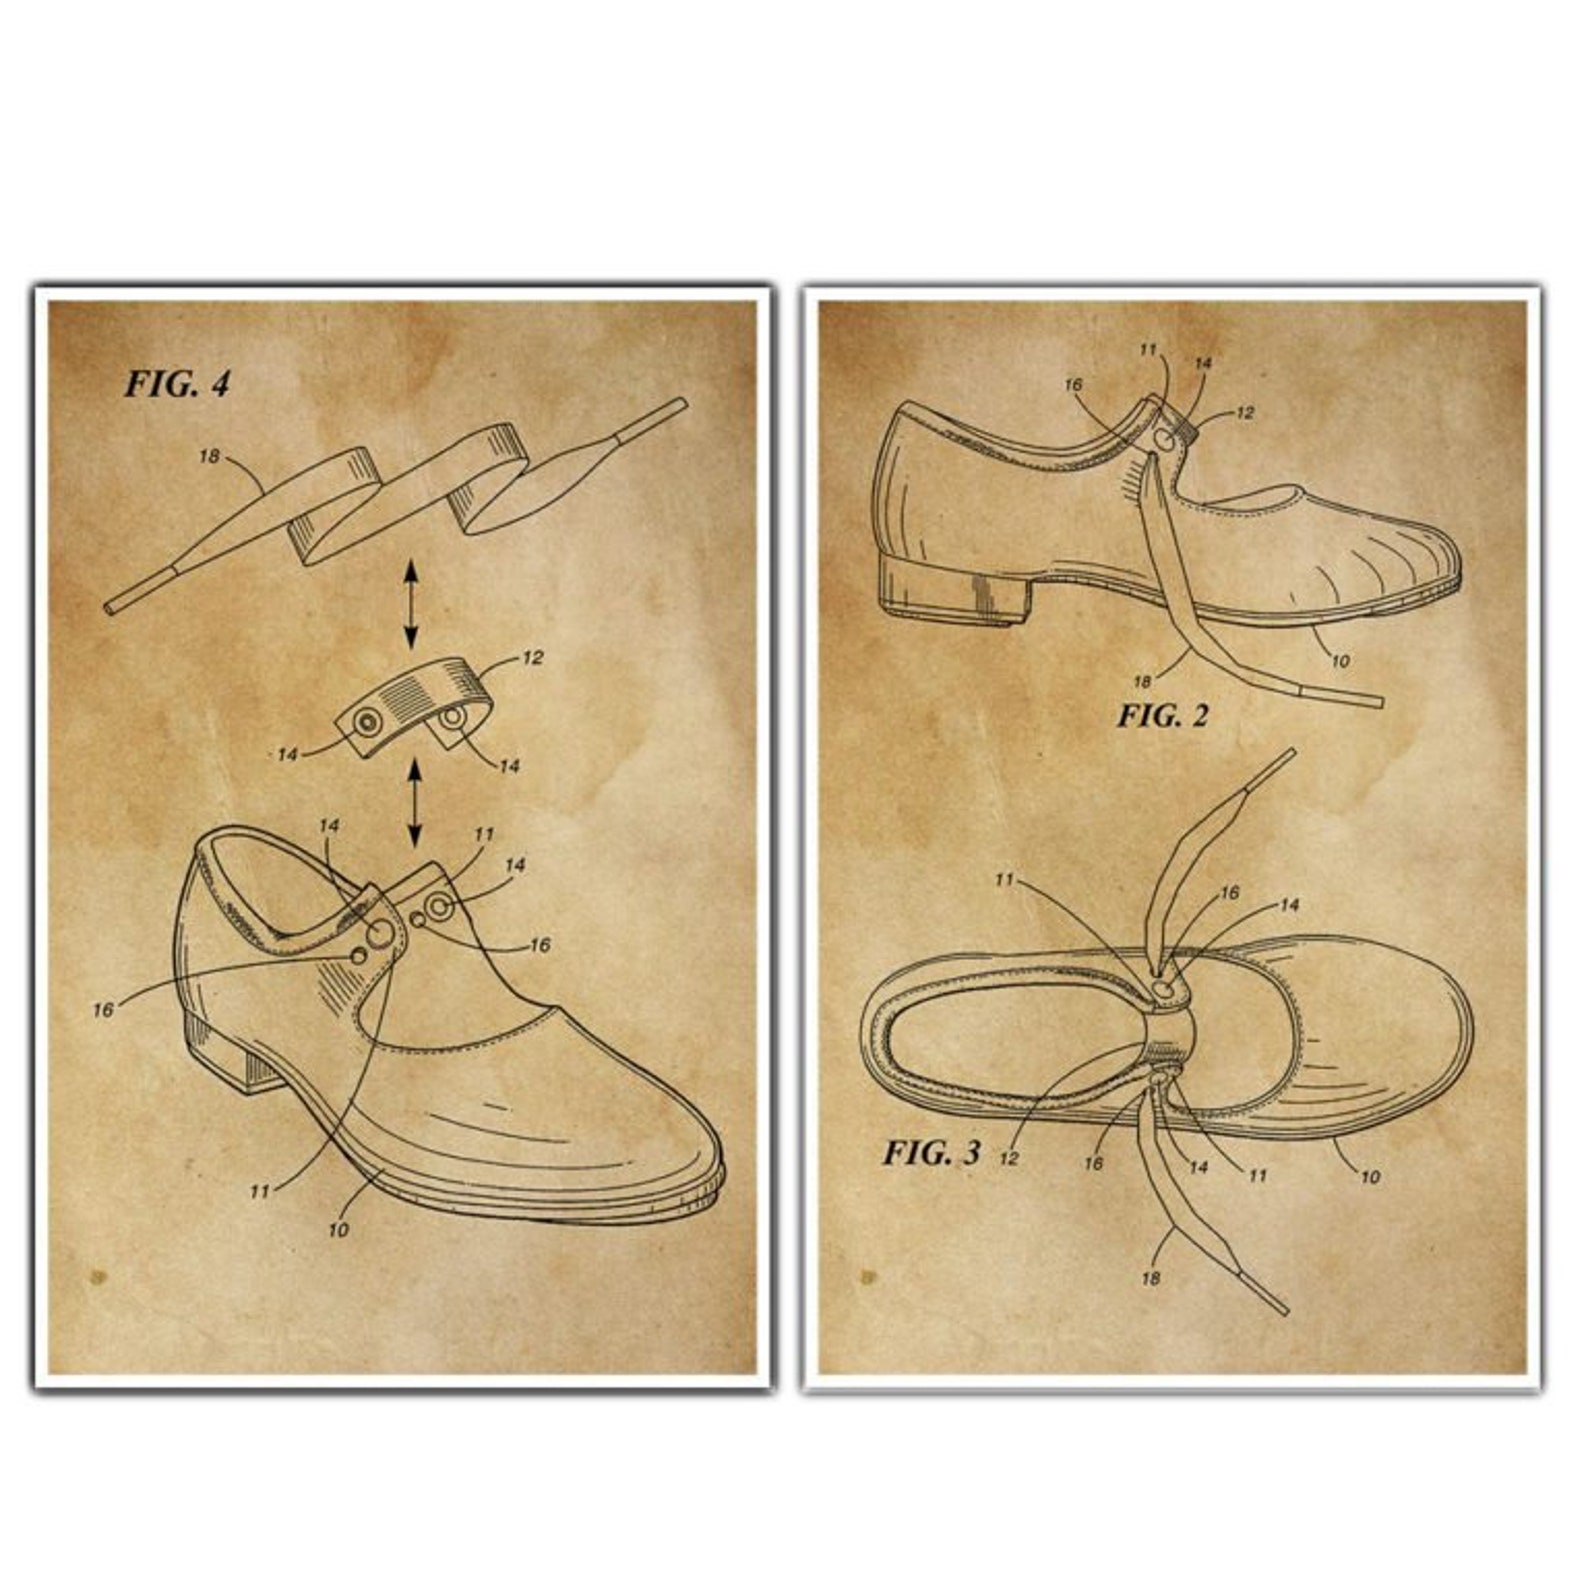 ballet tap shoes patent print posters – set of 2